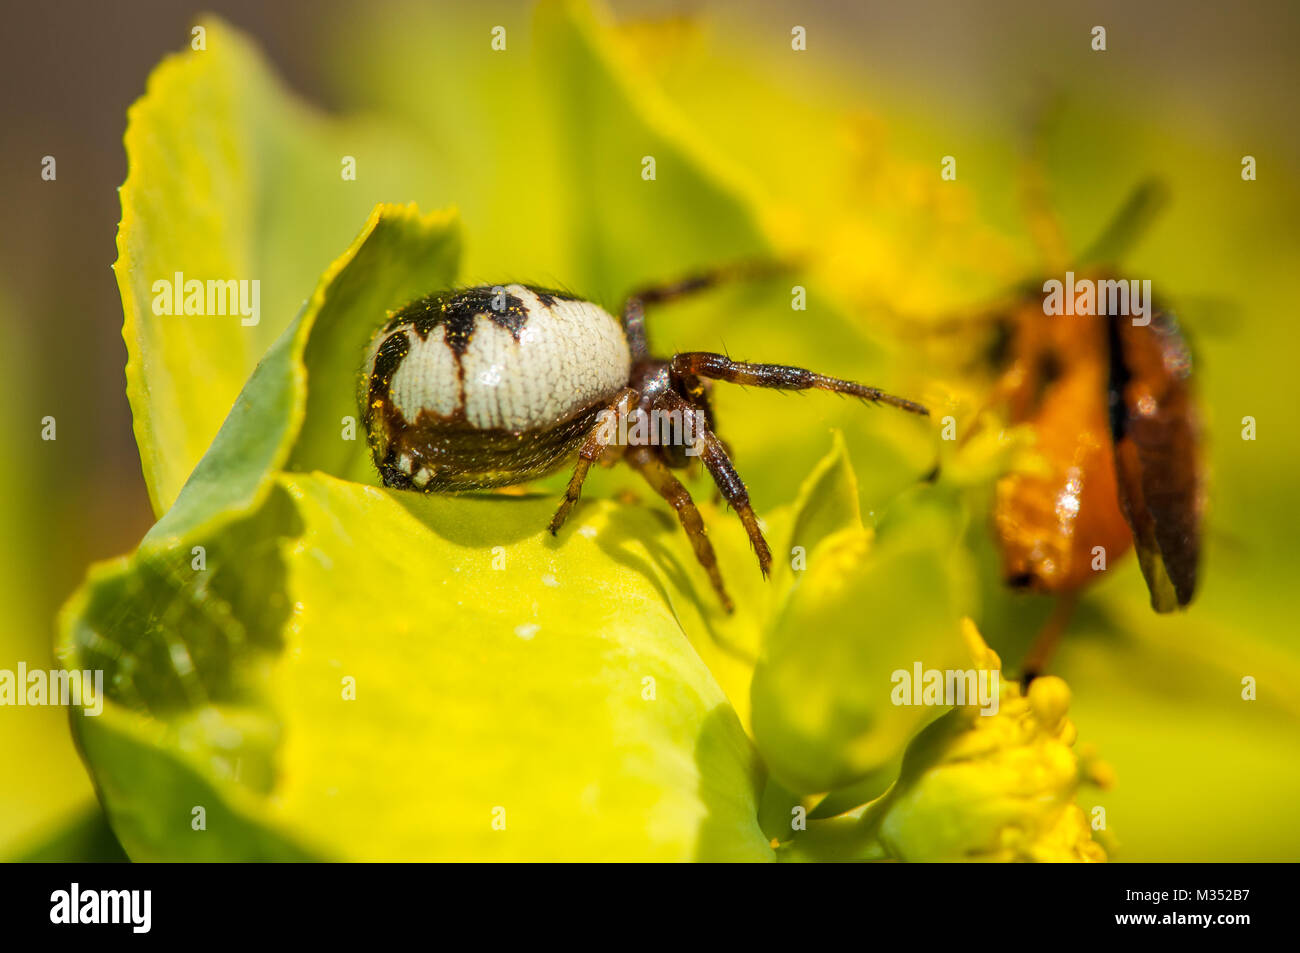 Cupboard Spider (Steatoda sp.) hunting a Hymenopter, Athalia sp. green flower Stock Photo